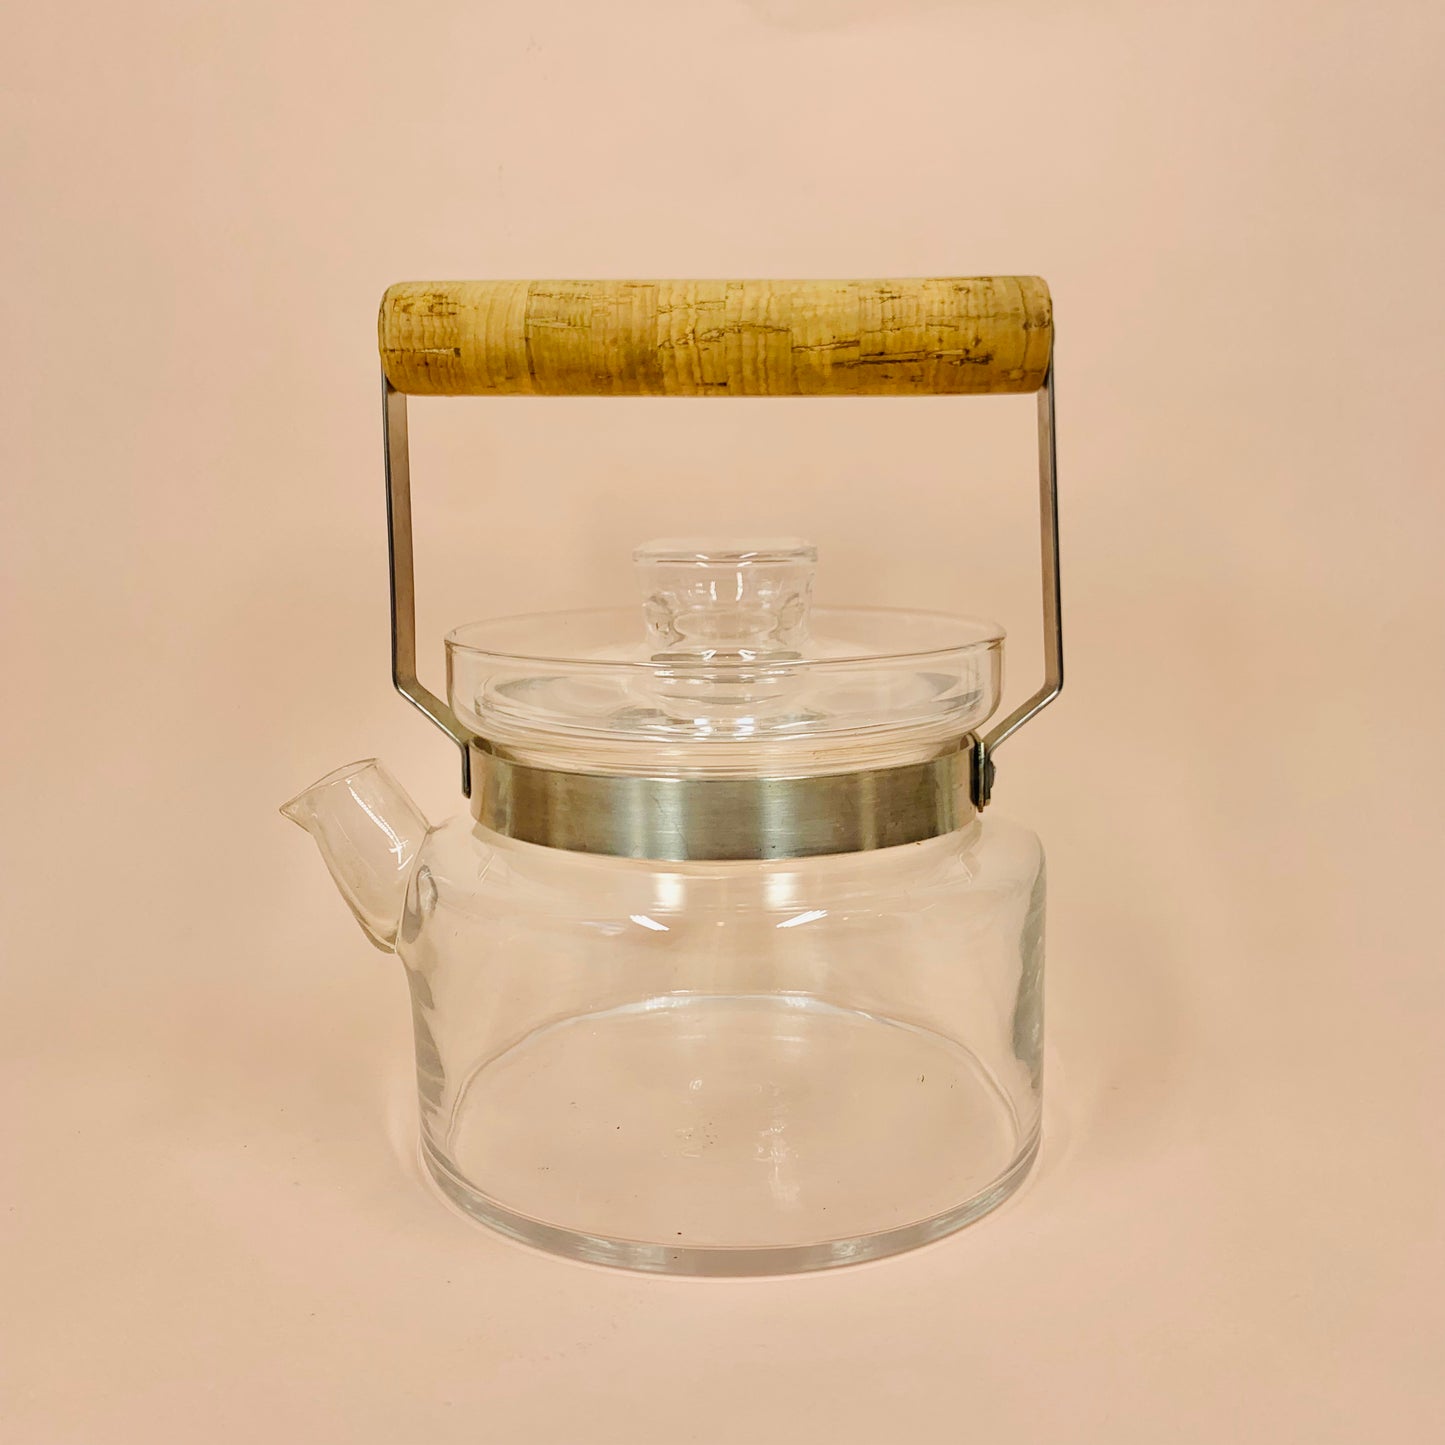 Extremely rare vintage clear glass Persson Melin coffee pot stacker